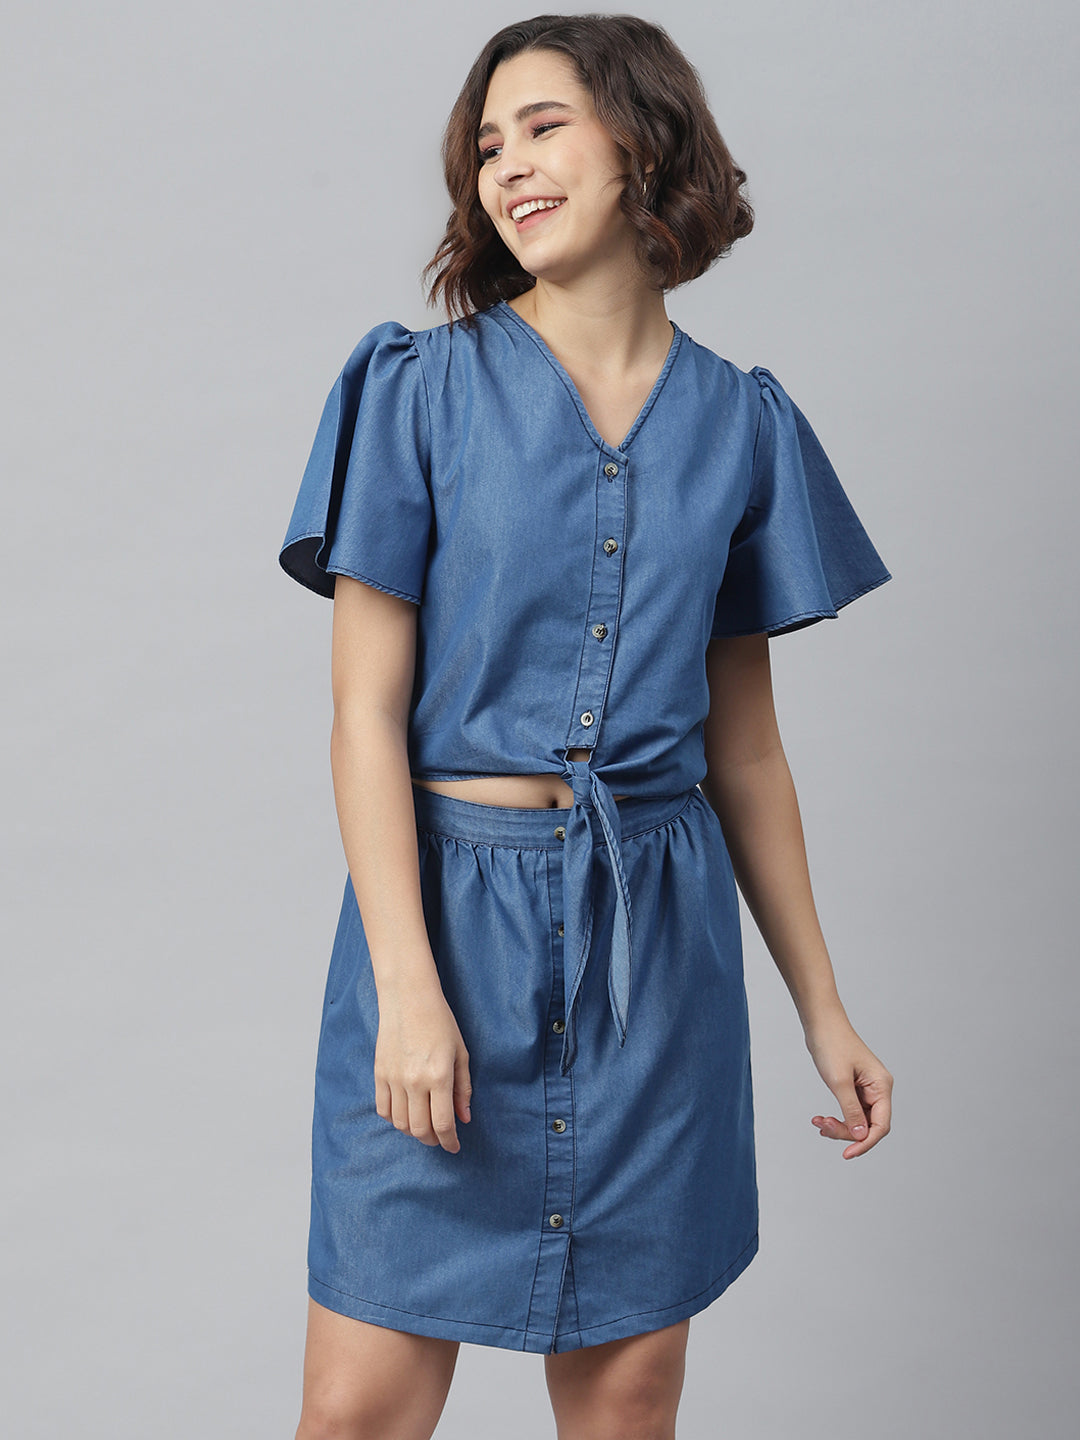 Women's Blue Denim Tie Knot Top and attached Skirt Dress - StyleStone